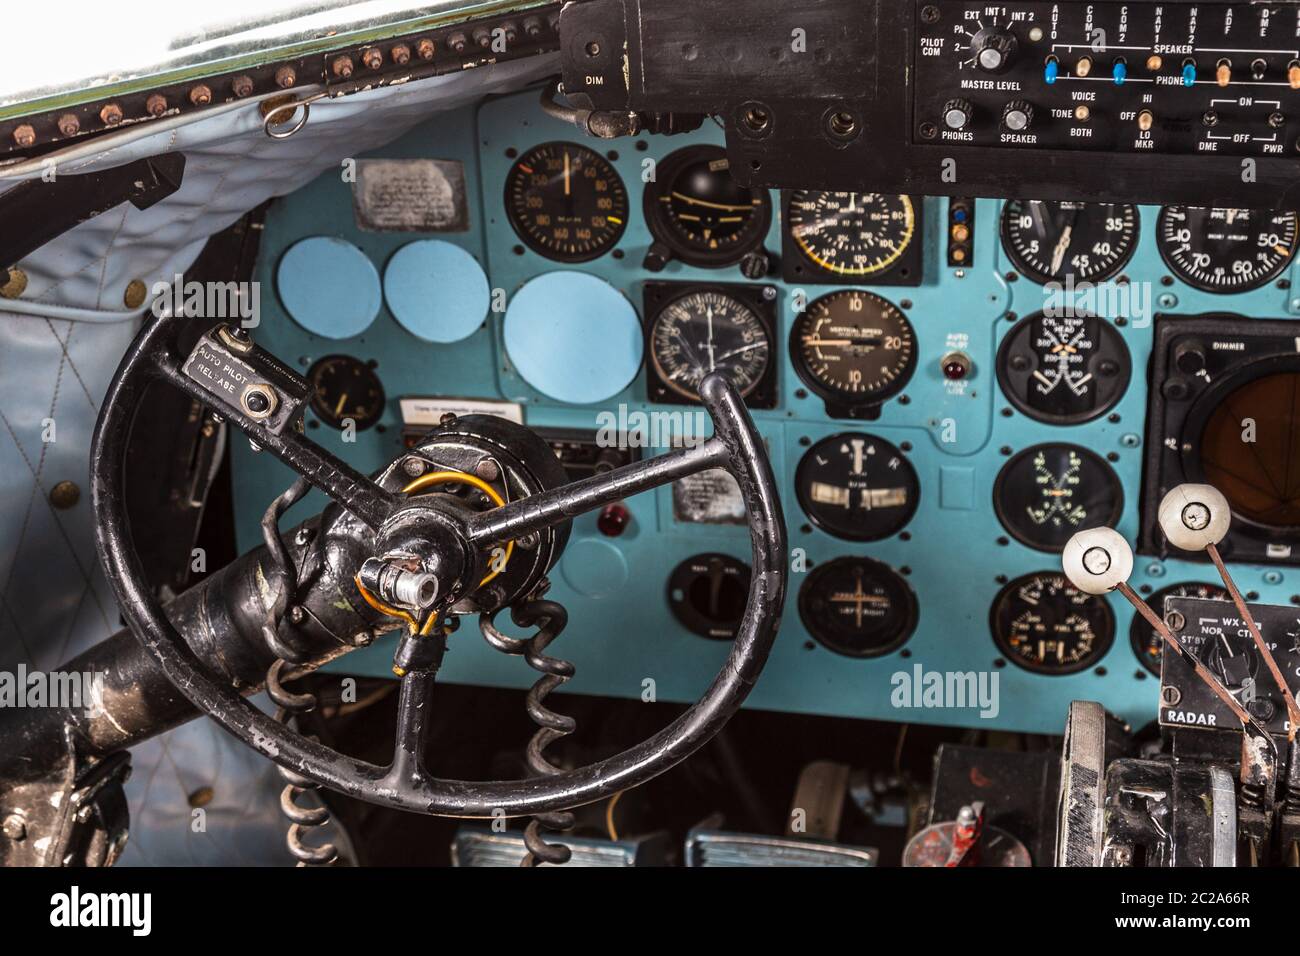 Dc Cockpit High Resolution Stock Photography and Images - Alamy